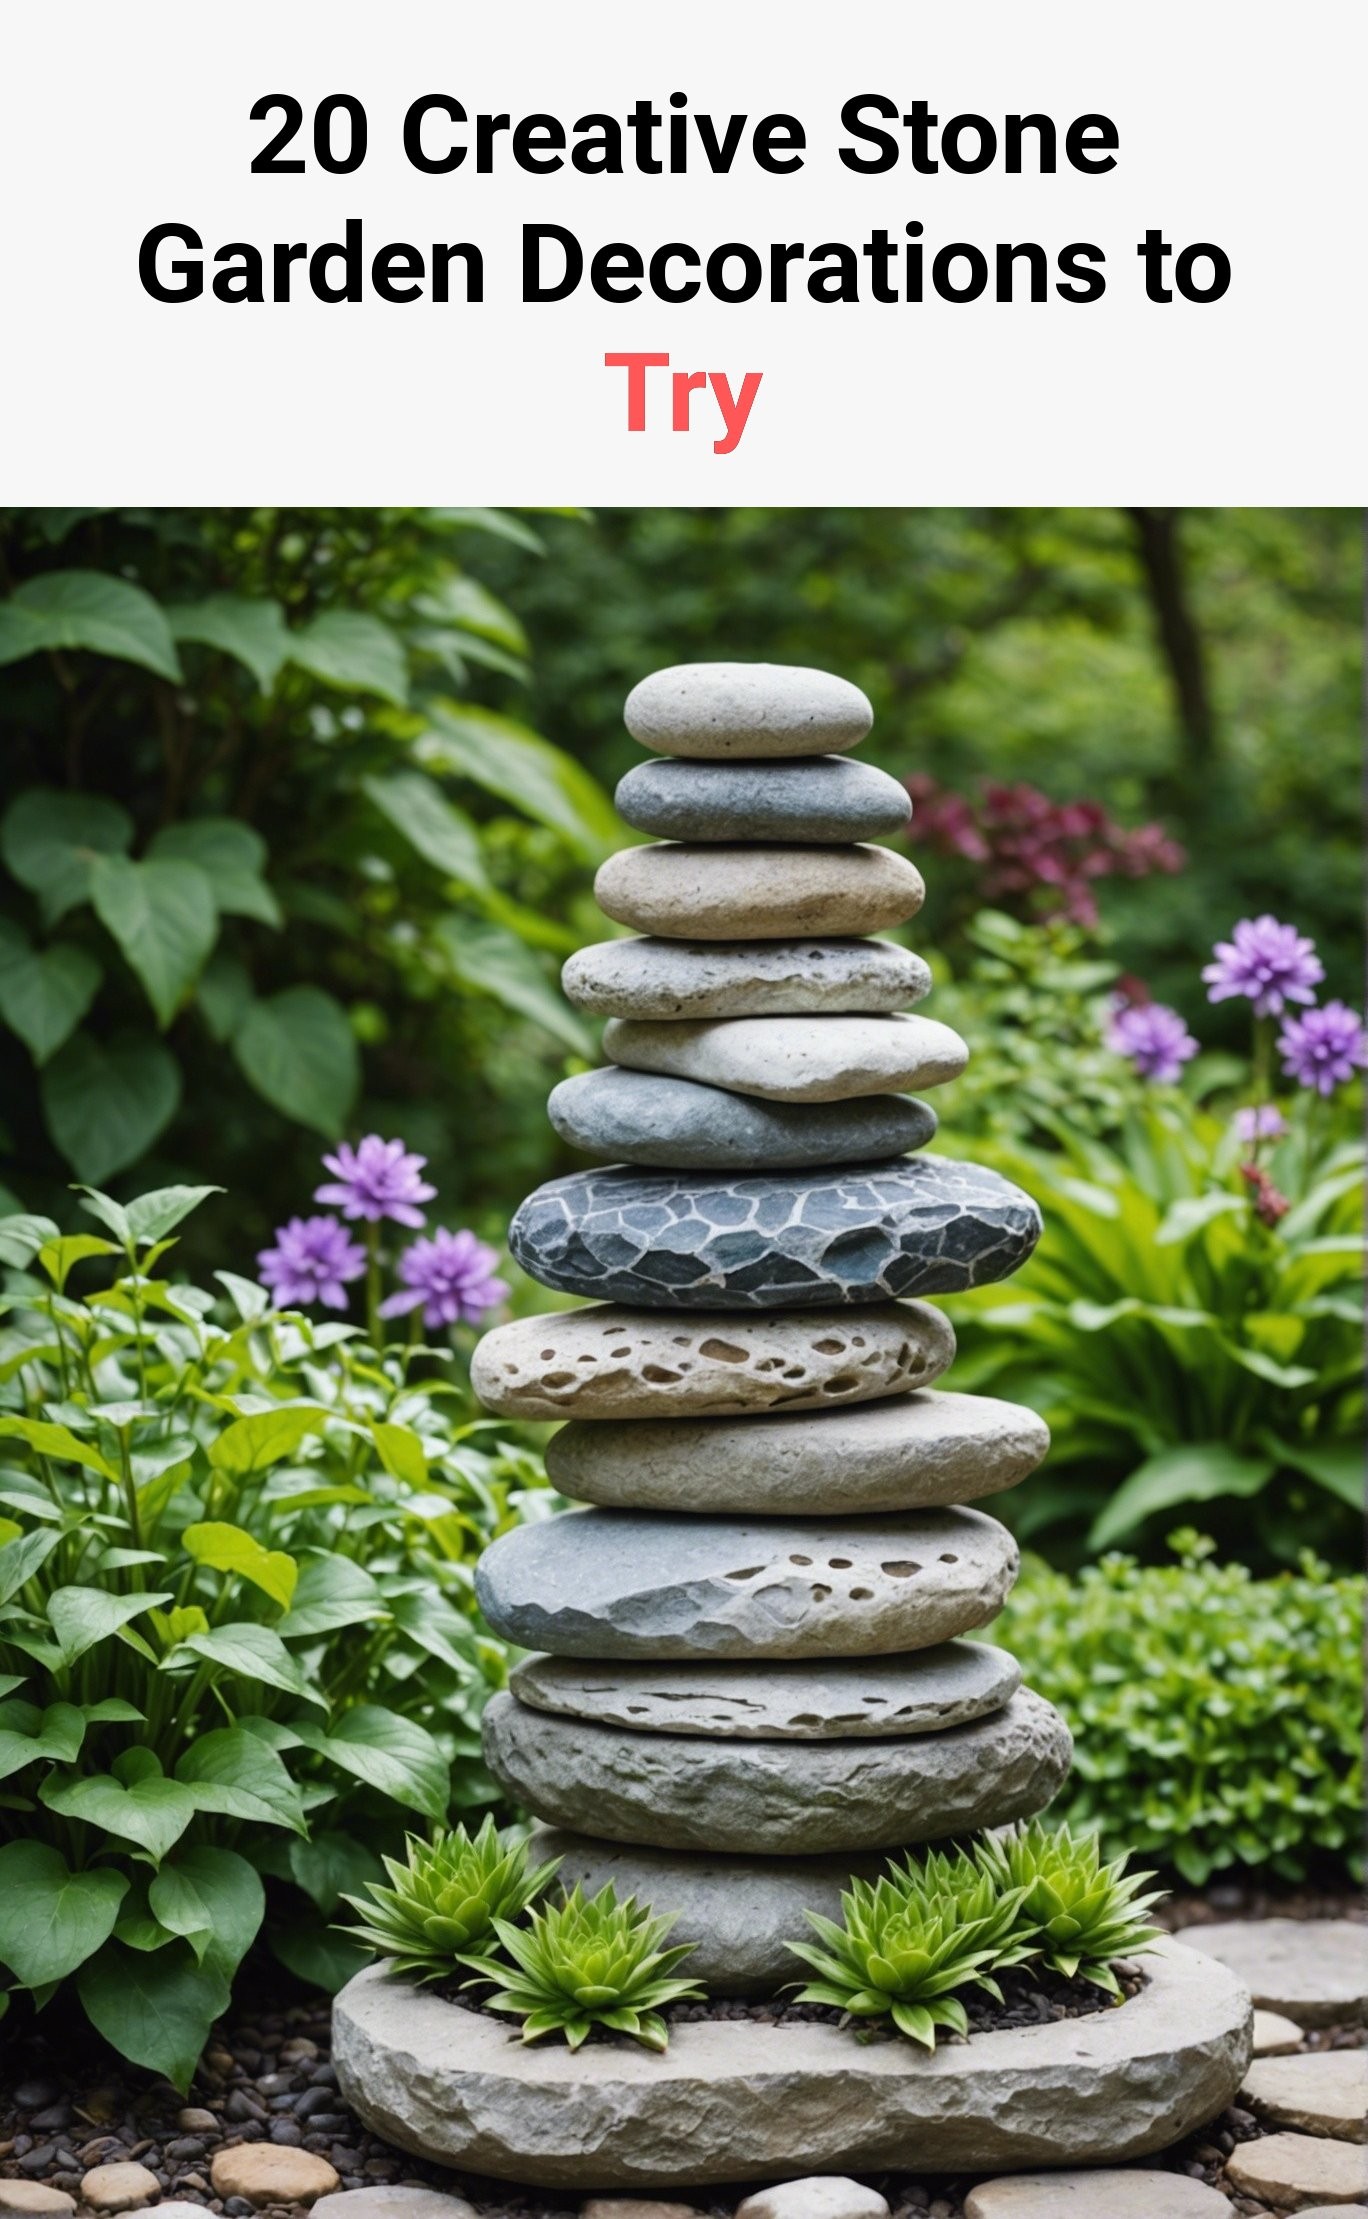 20 Creative Stone Garden Decorations to Try